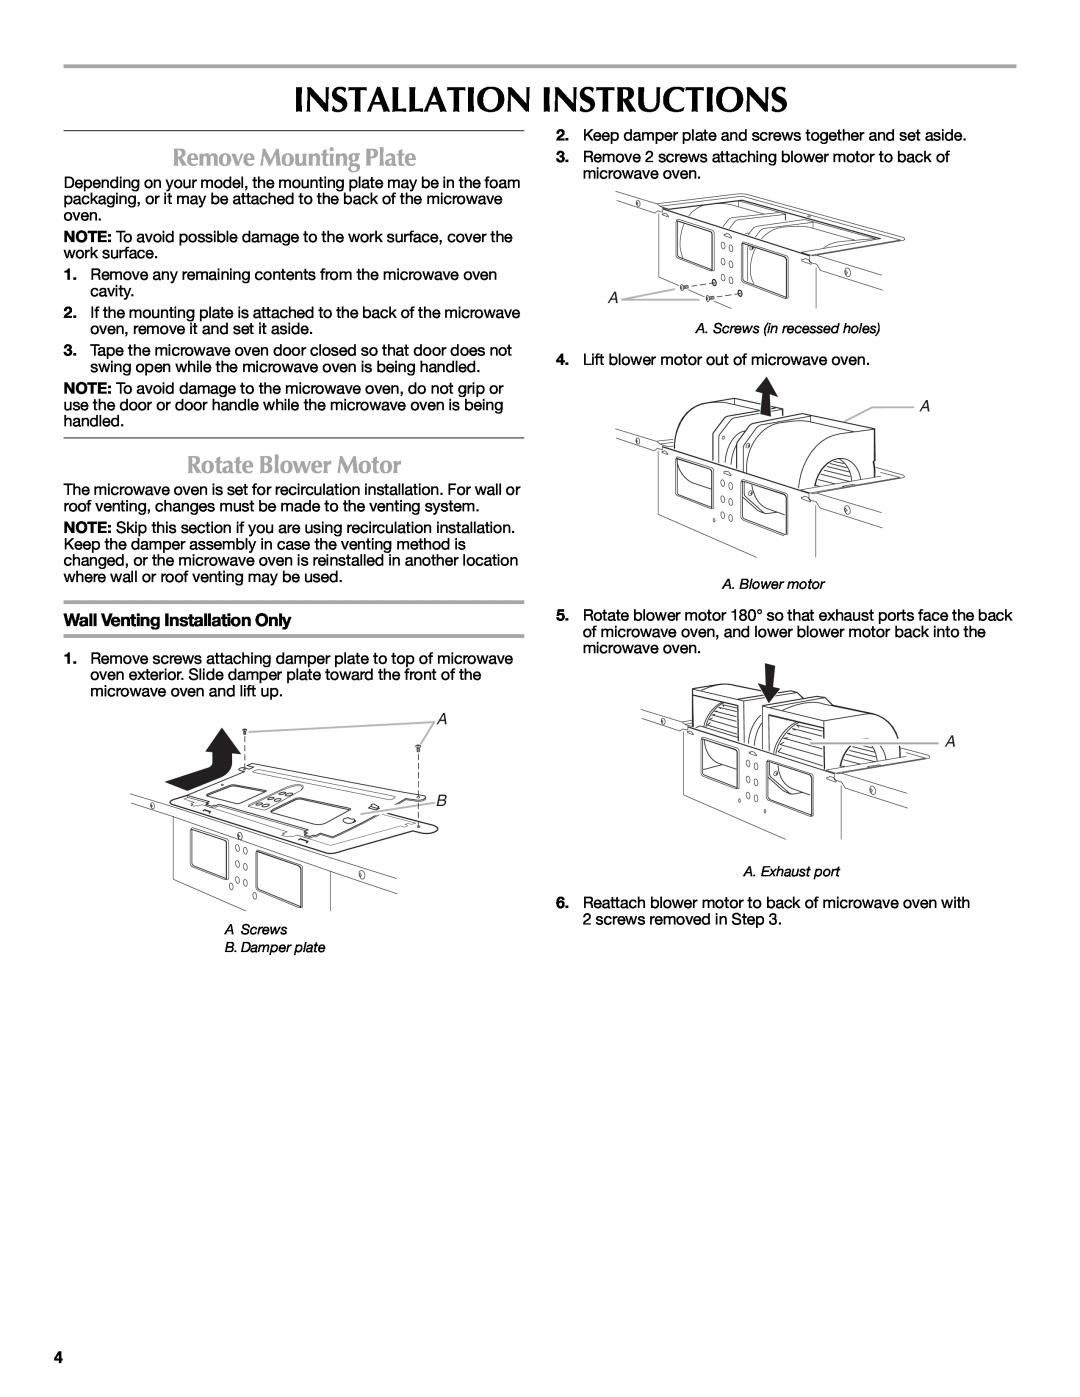 Maytag MMV5208WS Installation Instructions, Remove Mounting Plate, Rotate Blower Motor, Wall Venting Installation Only 